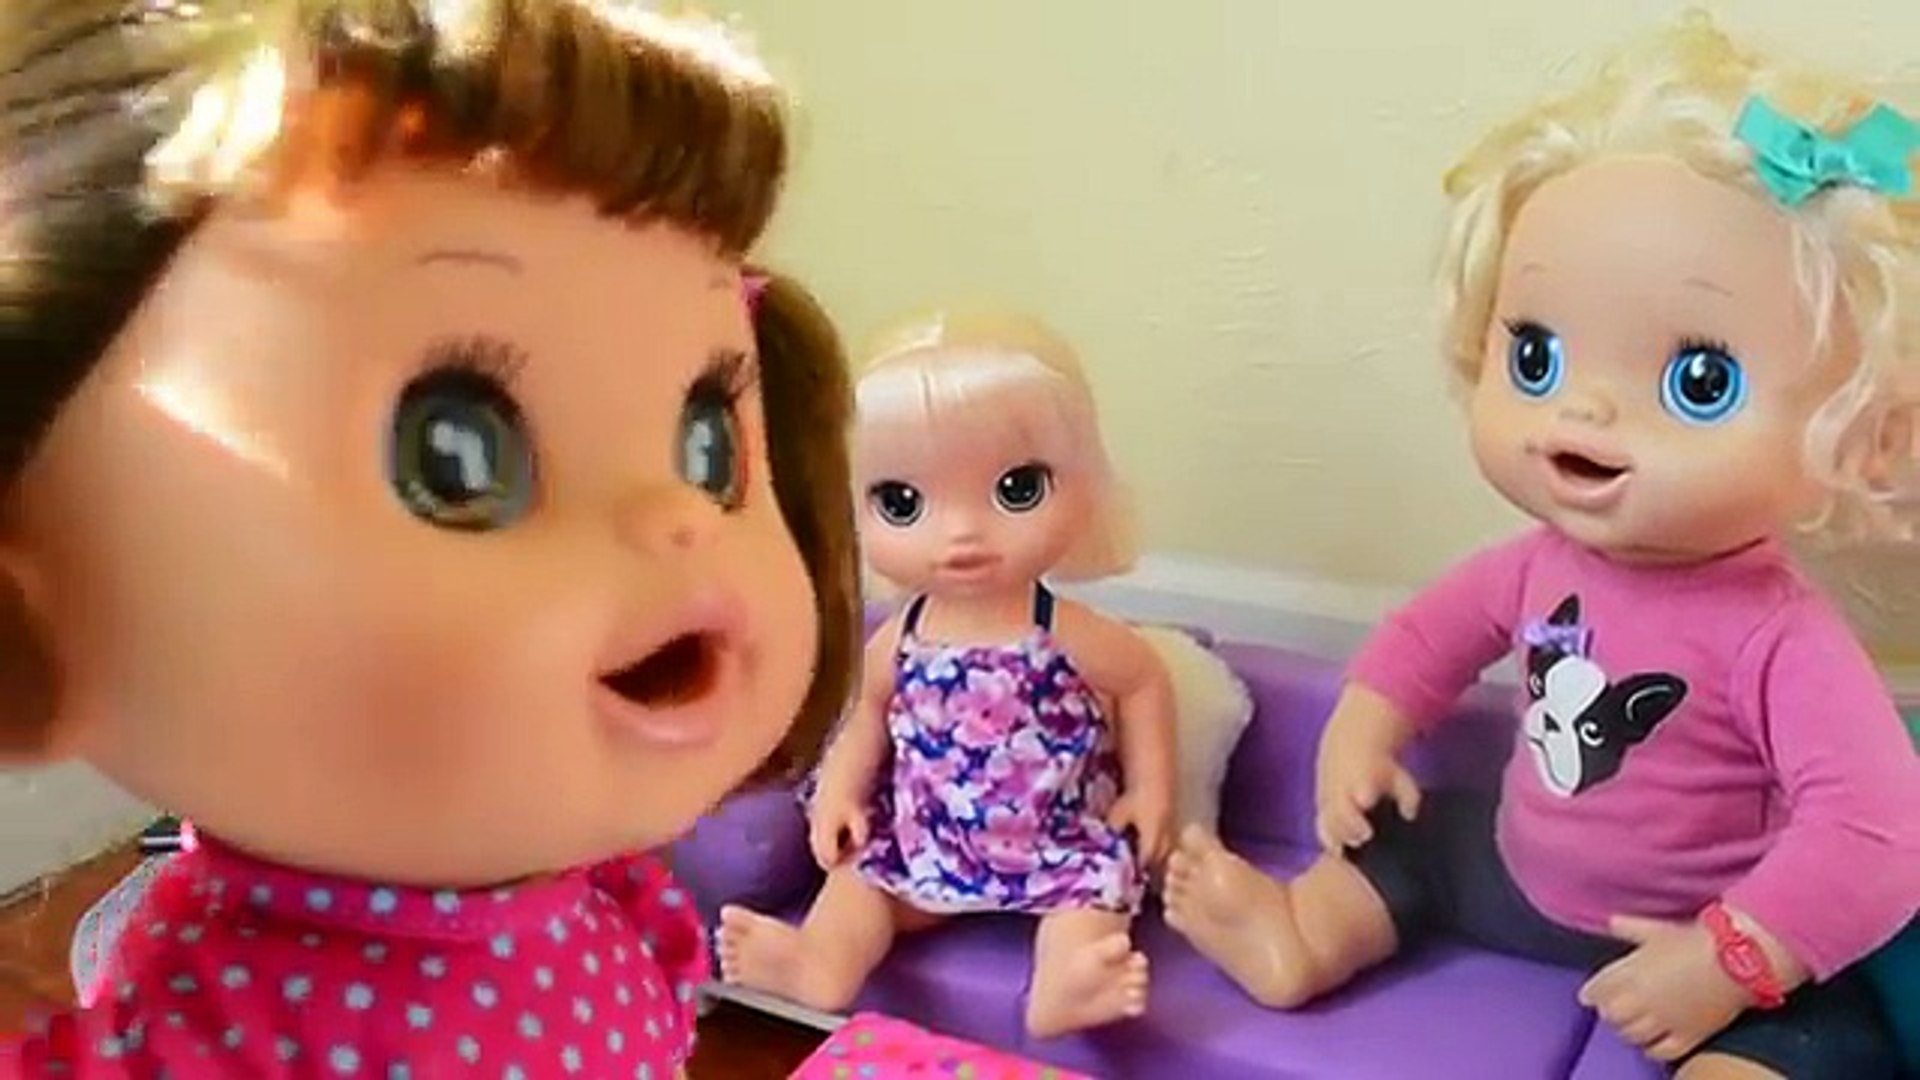 Baby Alive Molly Is Turned Into A Living Doll Baby Alive Comes To Life Video Dailymotion - baby doll videos playing roblox